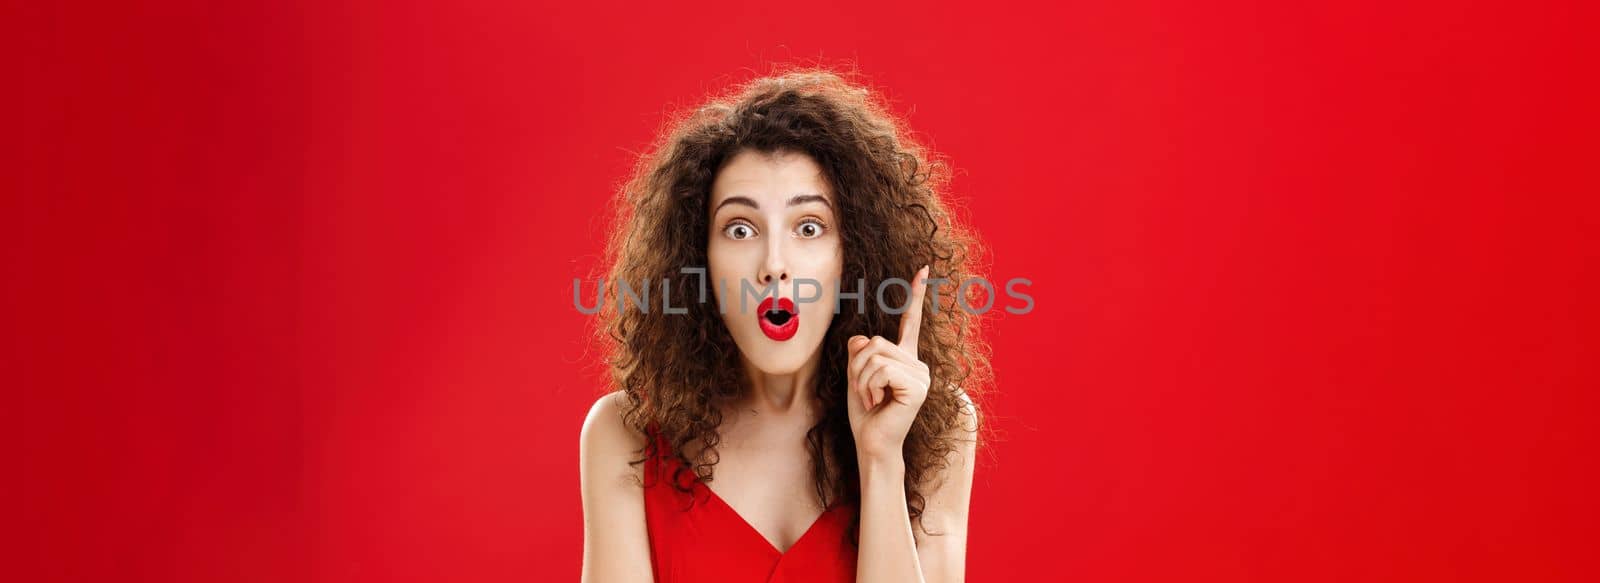 Woman remembered important information feeling excited adding suggestion with raised index finger in eureka gesture, folding lips in raising eyebrows being thrilled finally understanding. Emotions and gestures concept